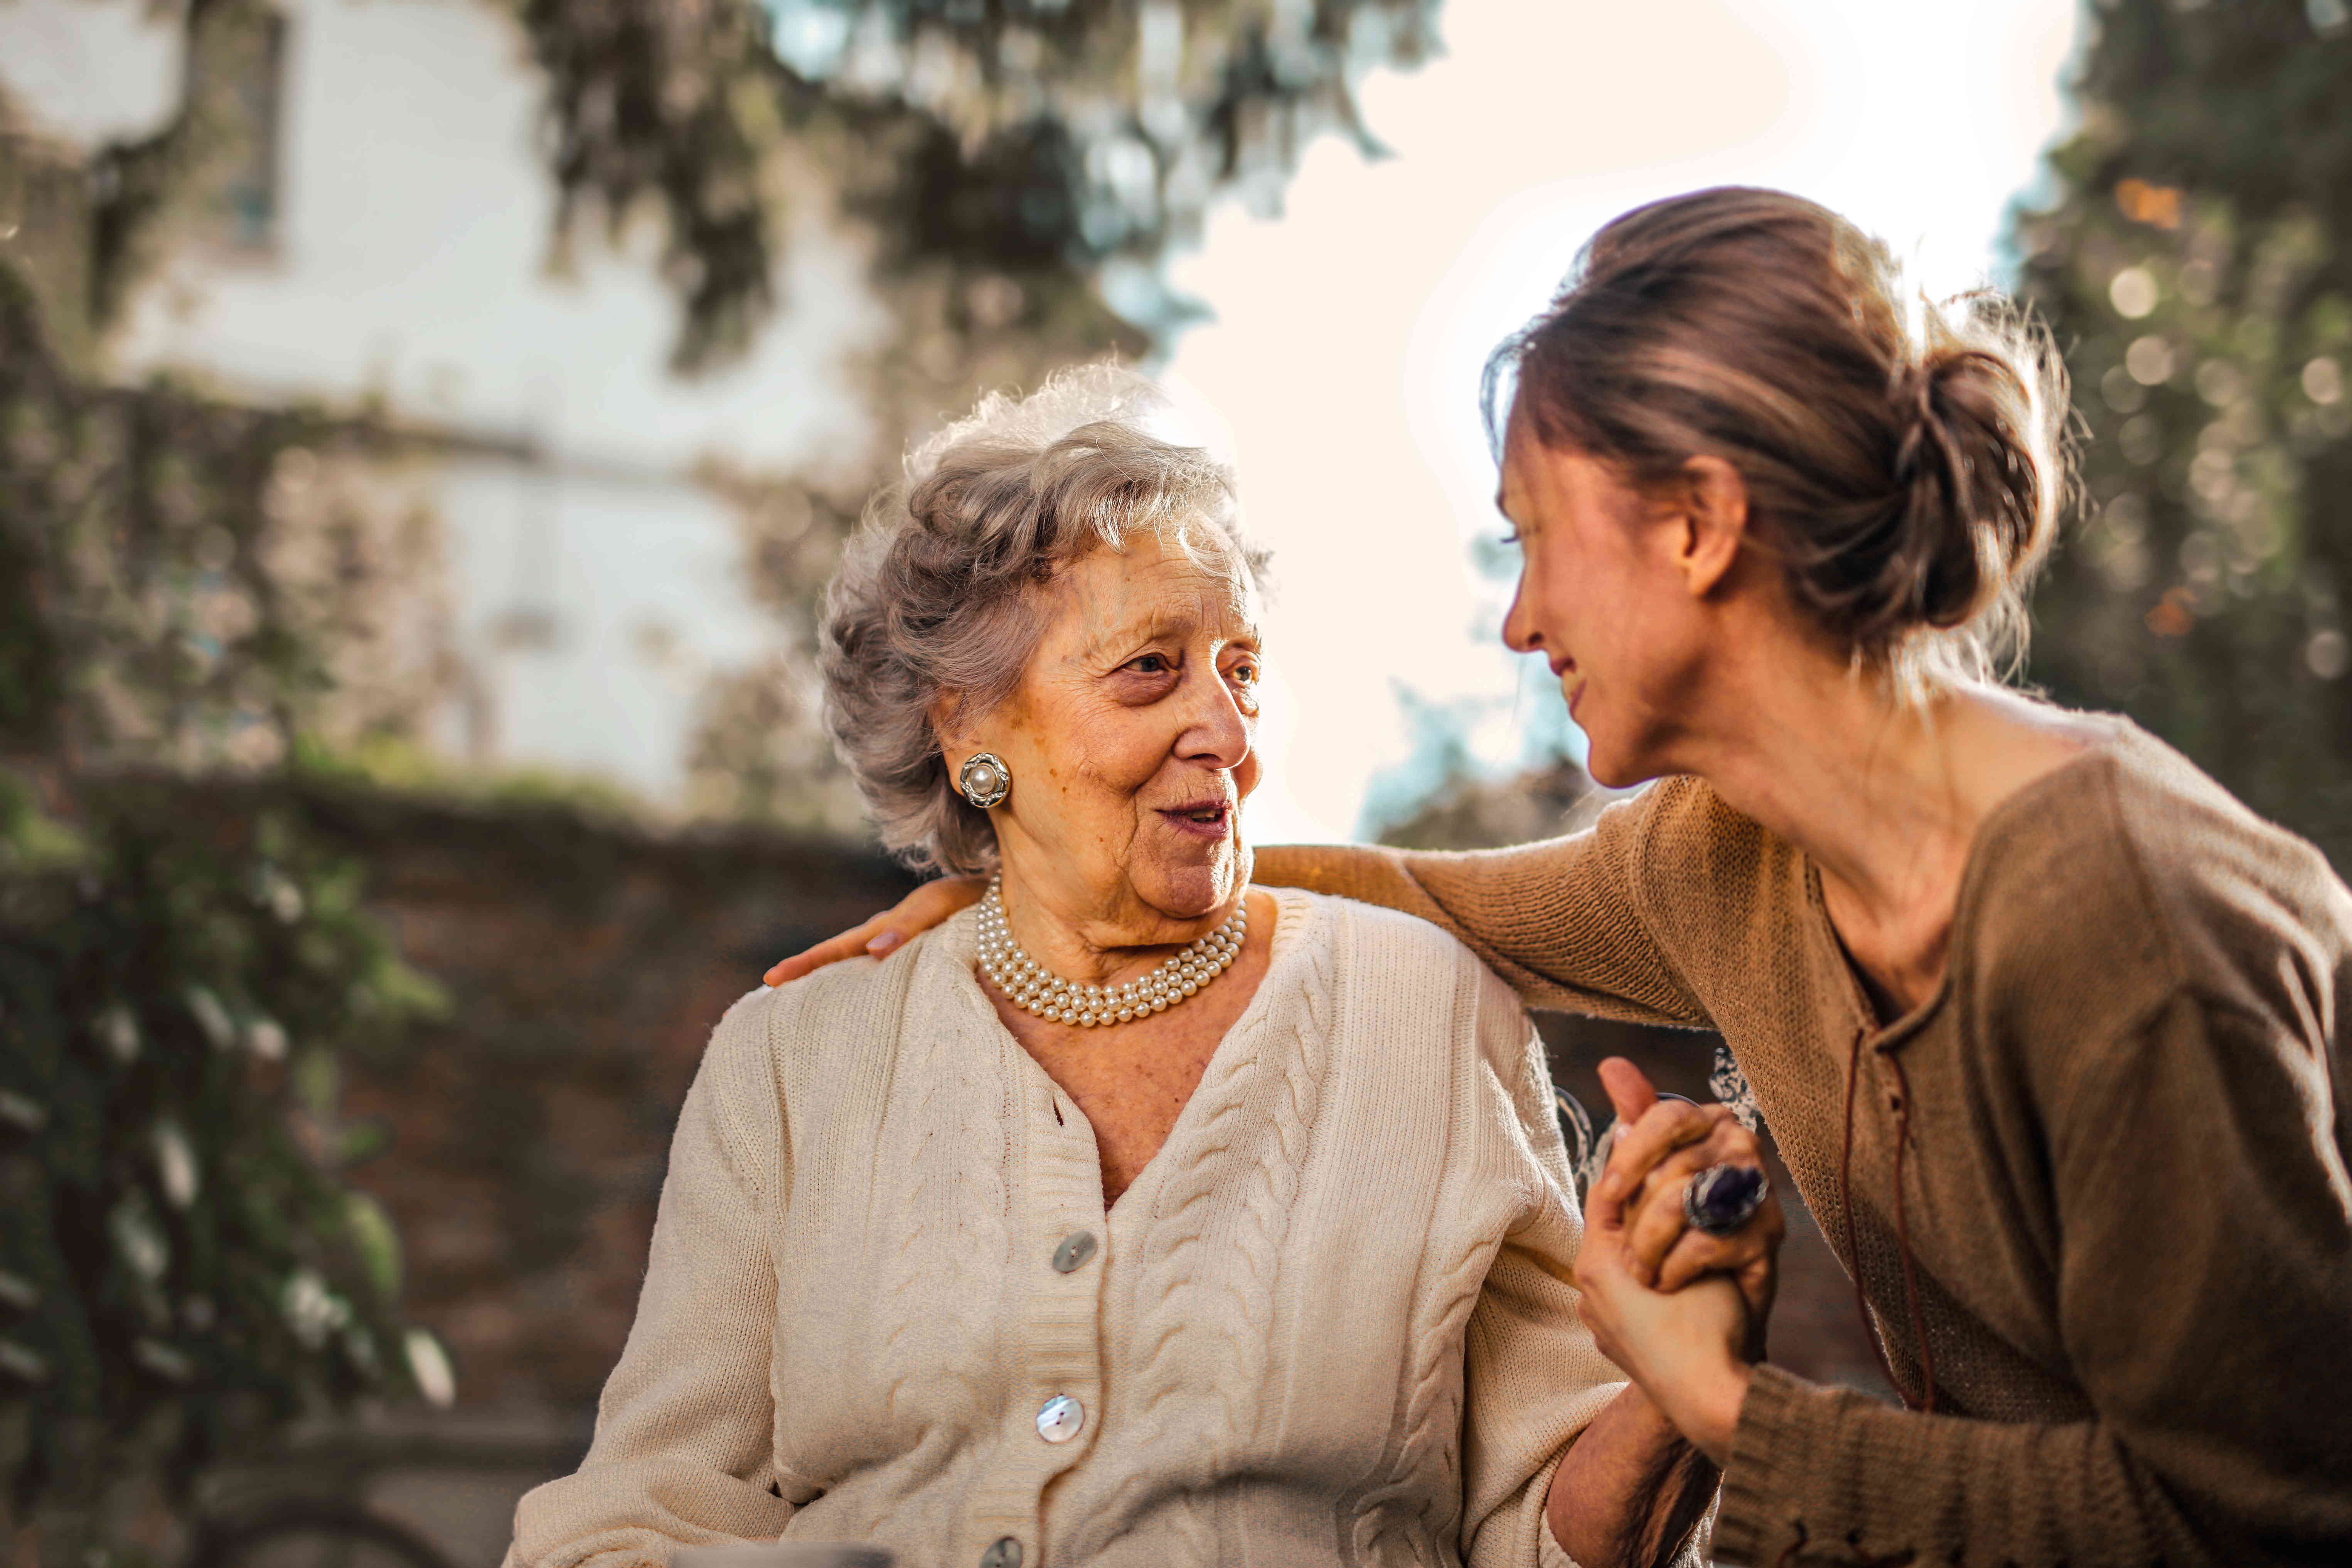 The Benefits of Private Home Care You May Not Know About